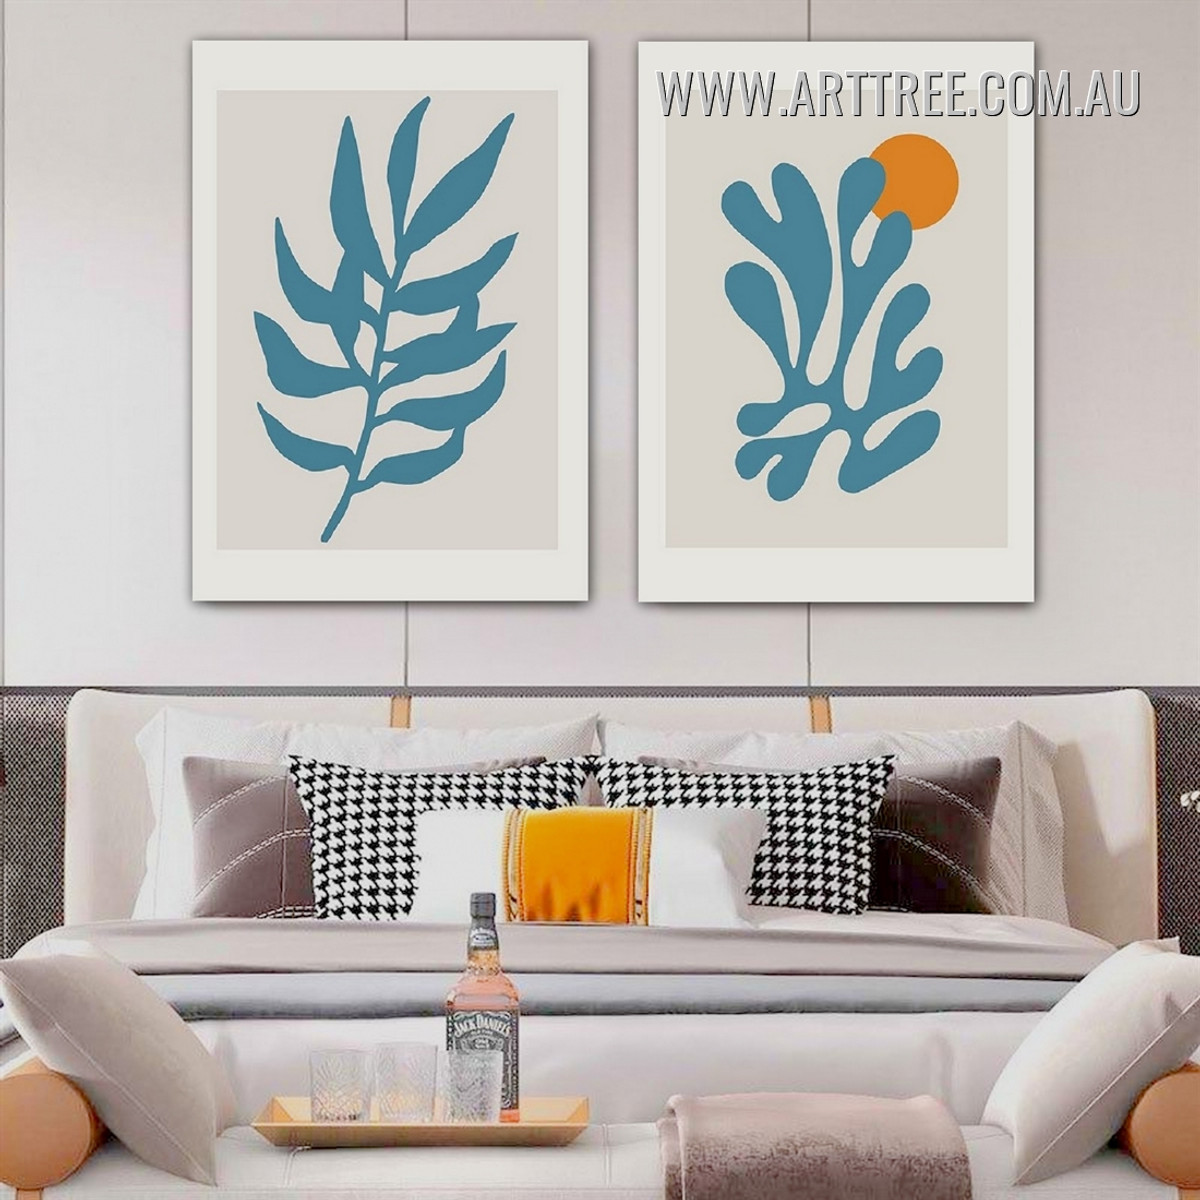 Smear Foliage Leaves Modern Art Picture 2 Piece Abstract Framed Canvas Minimalist Print for Room Wall Getup